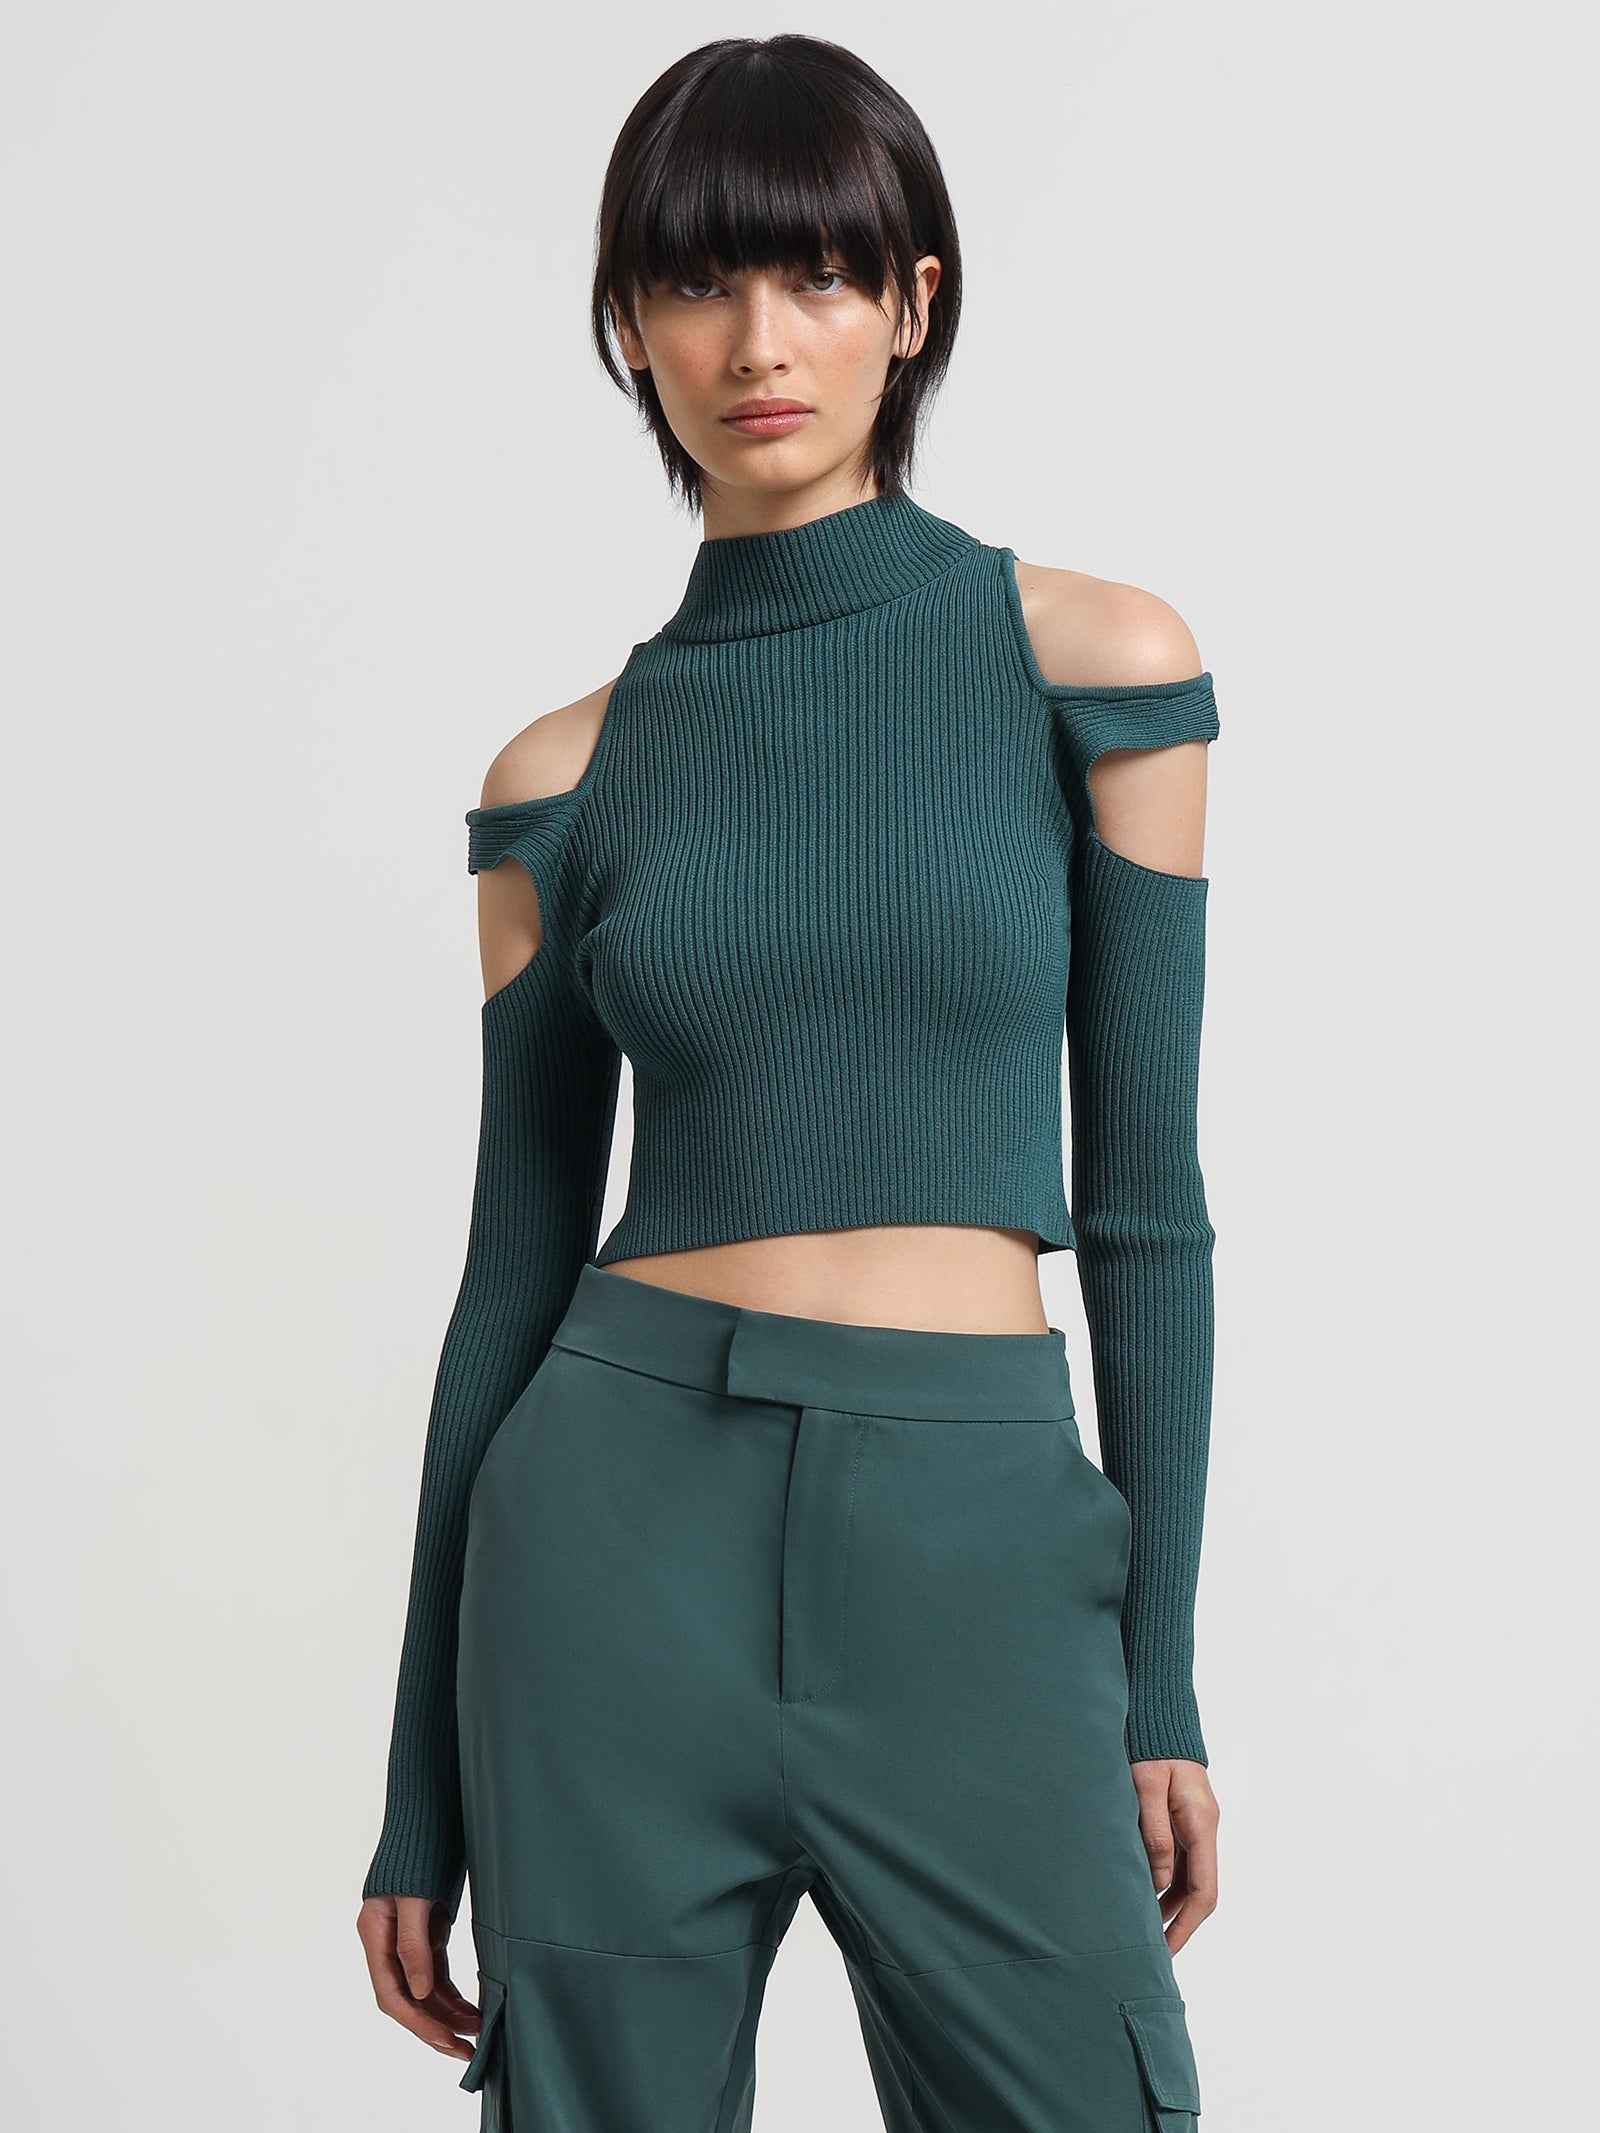 Mikal Knit Top in Pine